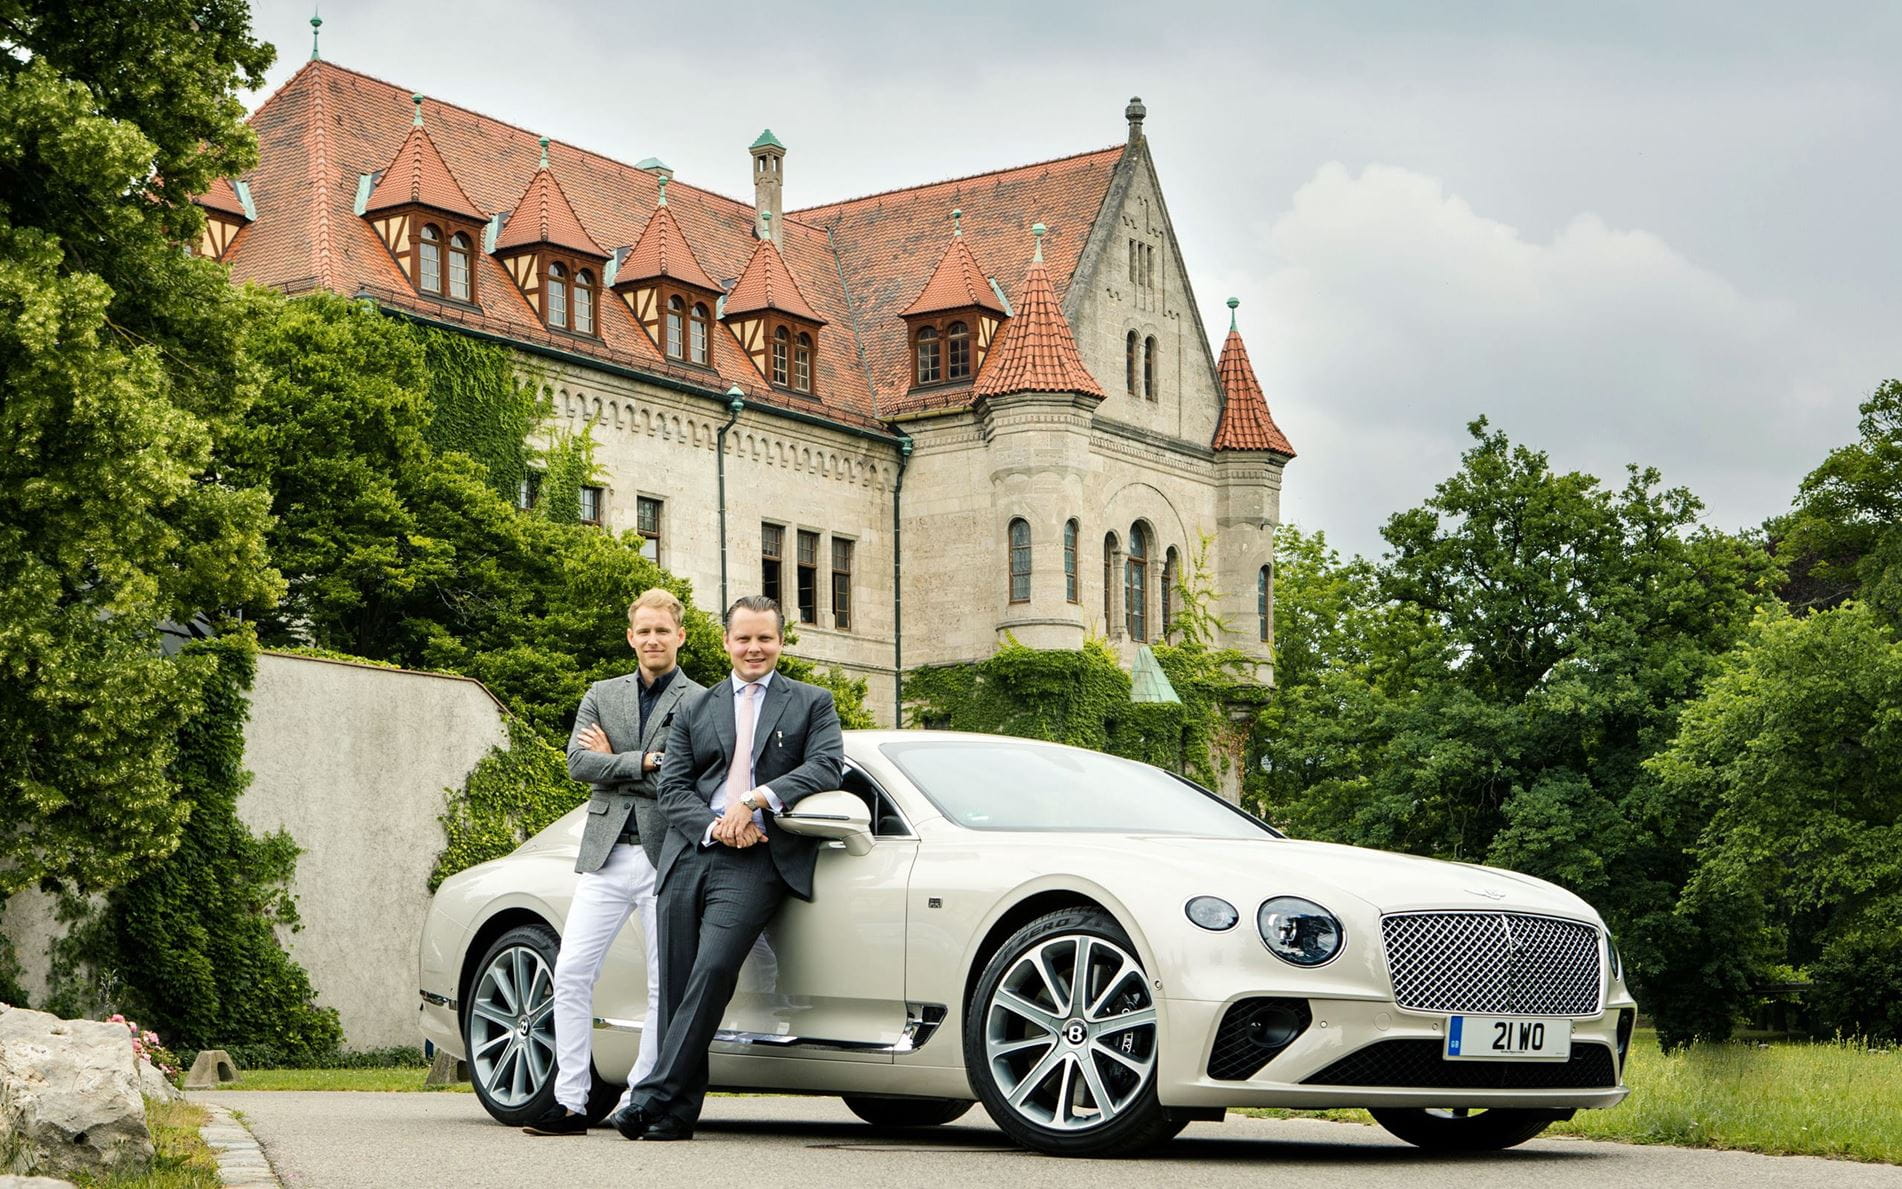 Bentley Car in front of Faber-Castell Castle